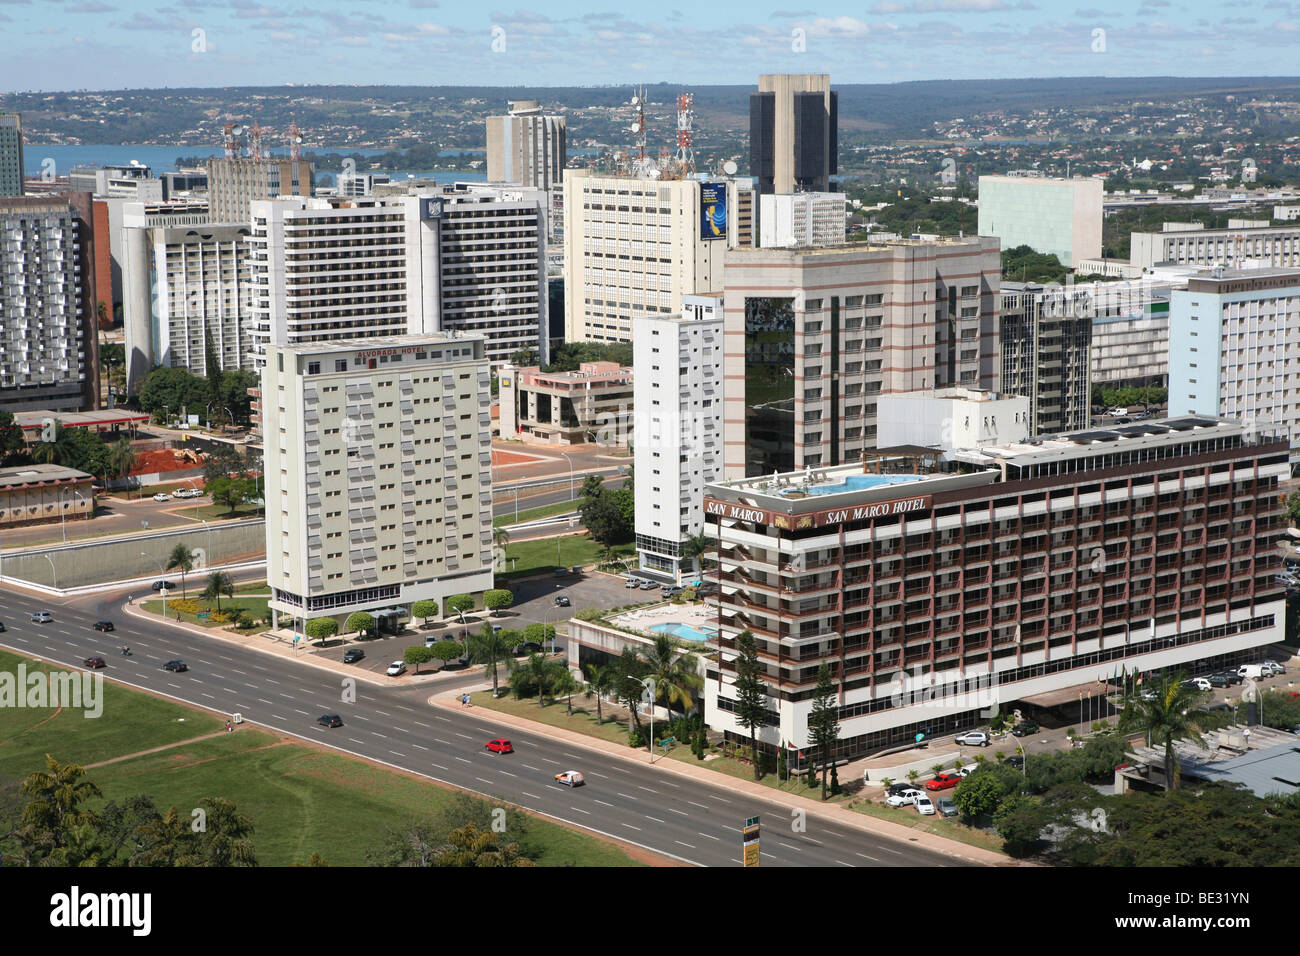 Brazilia is the (political) capital of Brazil. All government offices are established in this newly built city. Stock Photo